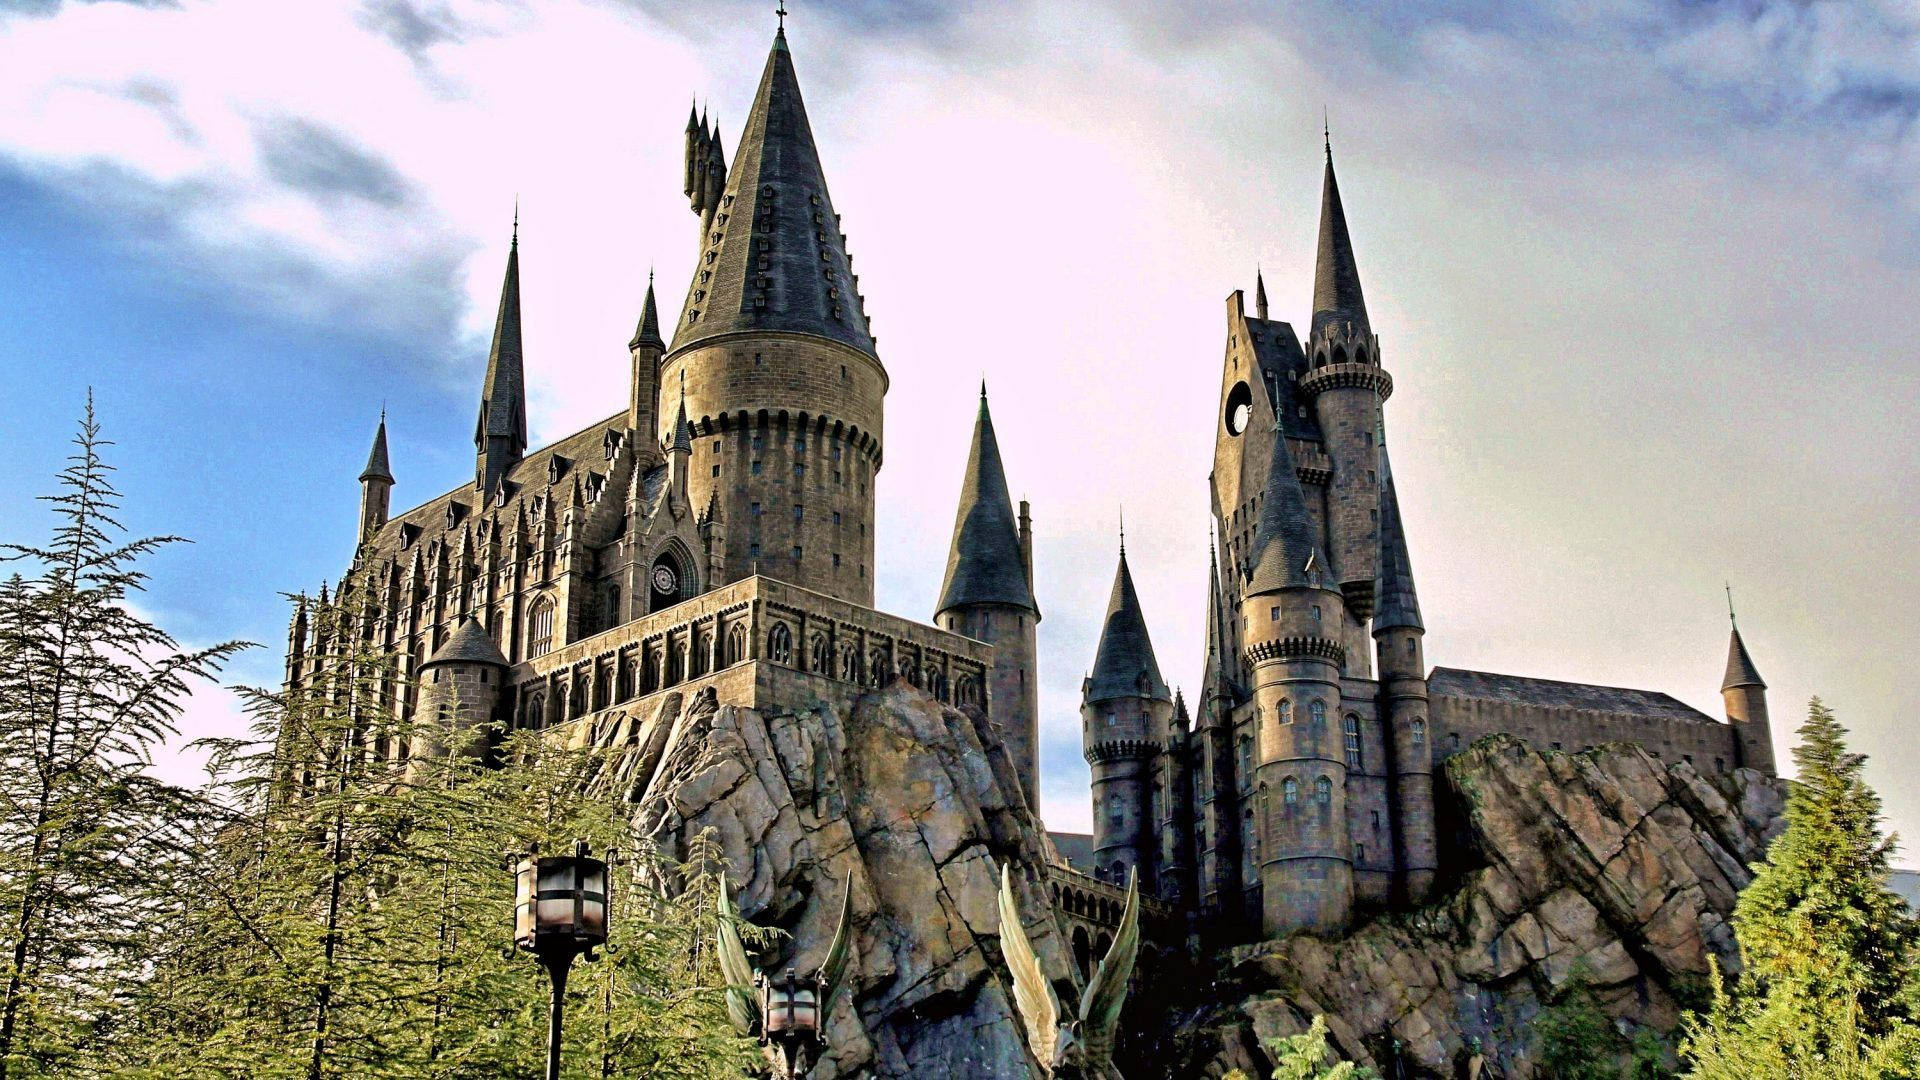 "Welcome to Hogwarts Castle!" Wallpaper